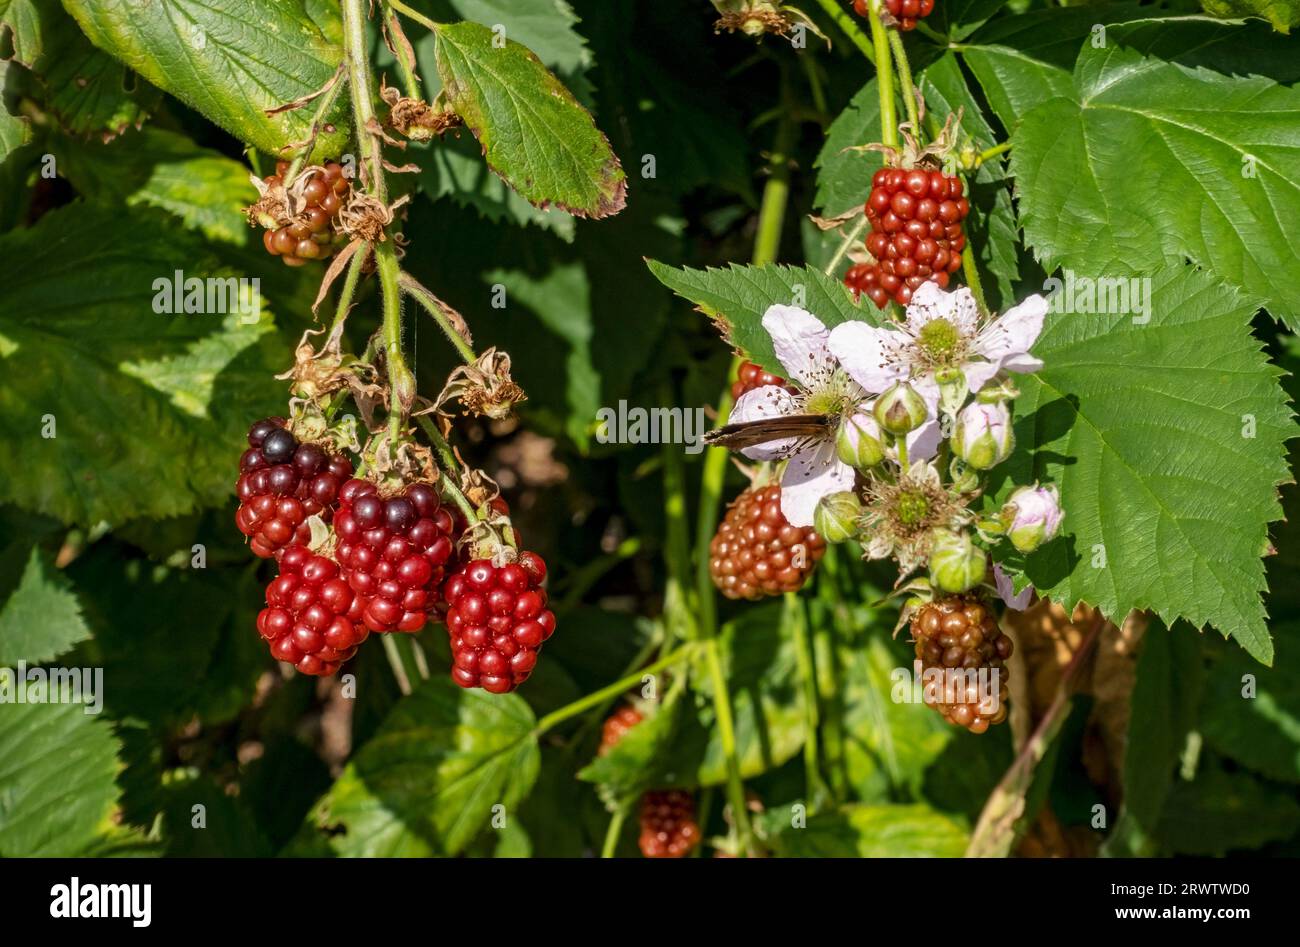 Close up of flowers and unripe berries on blackberry bramble brambles bush plant growing flowering in a garden in early summer England UK GB Britain Stock Photo